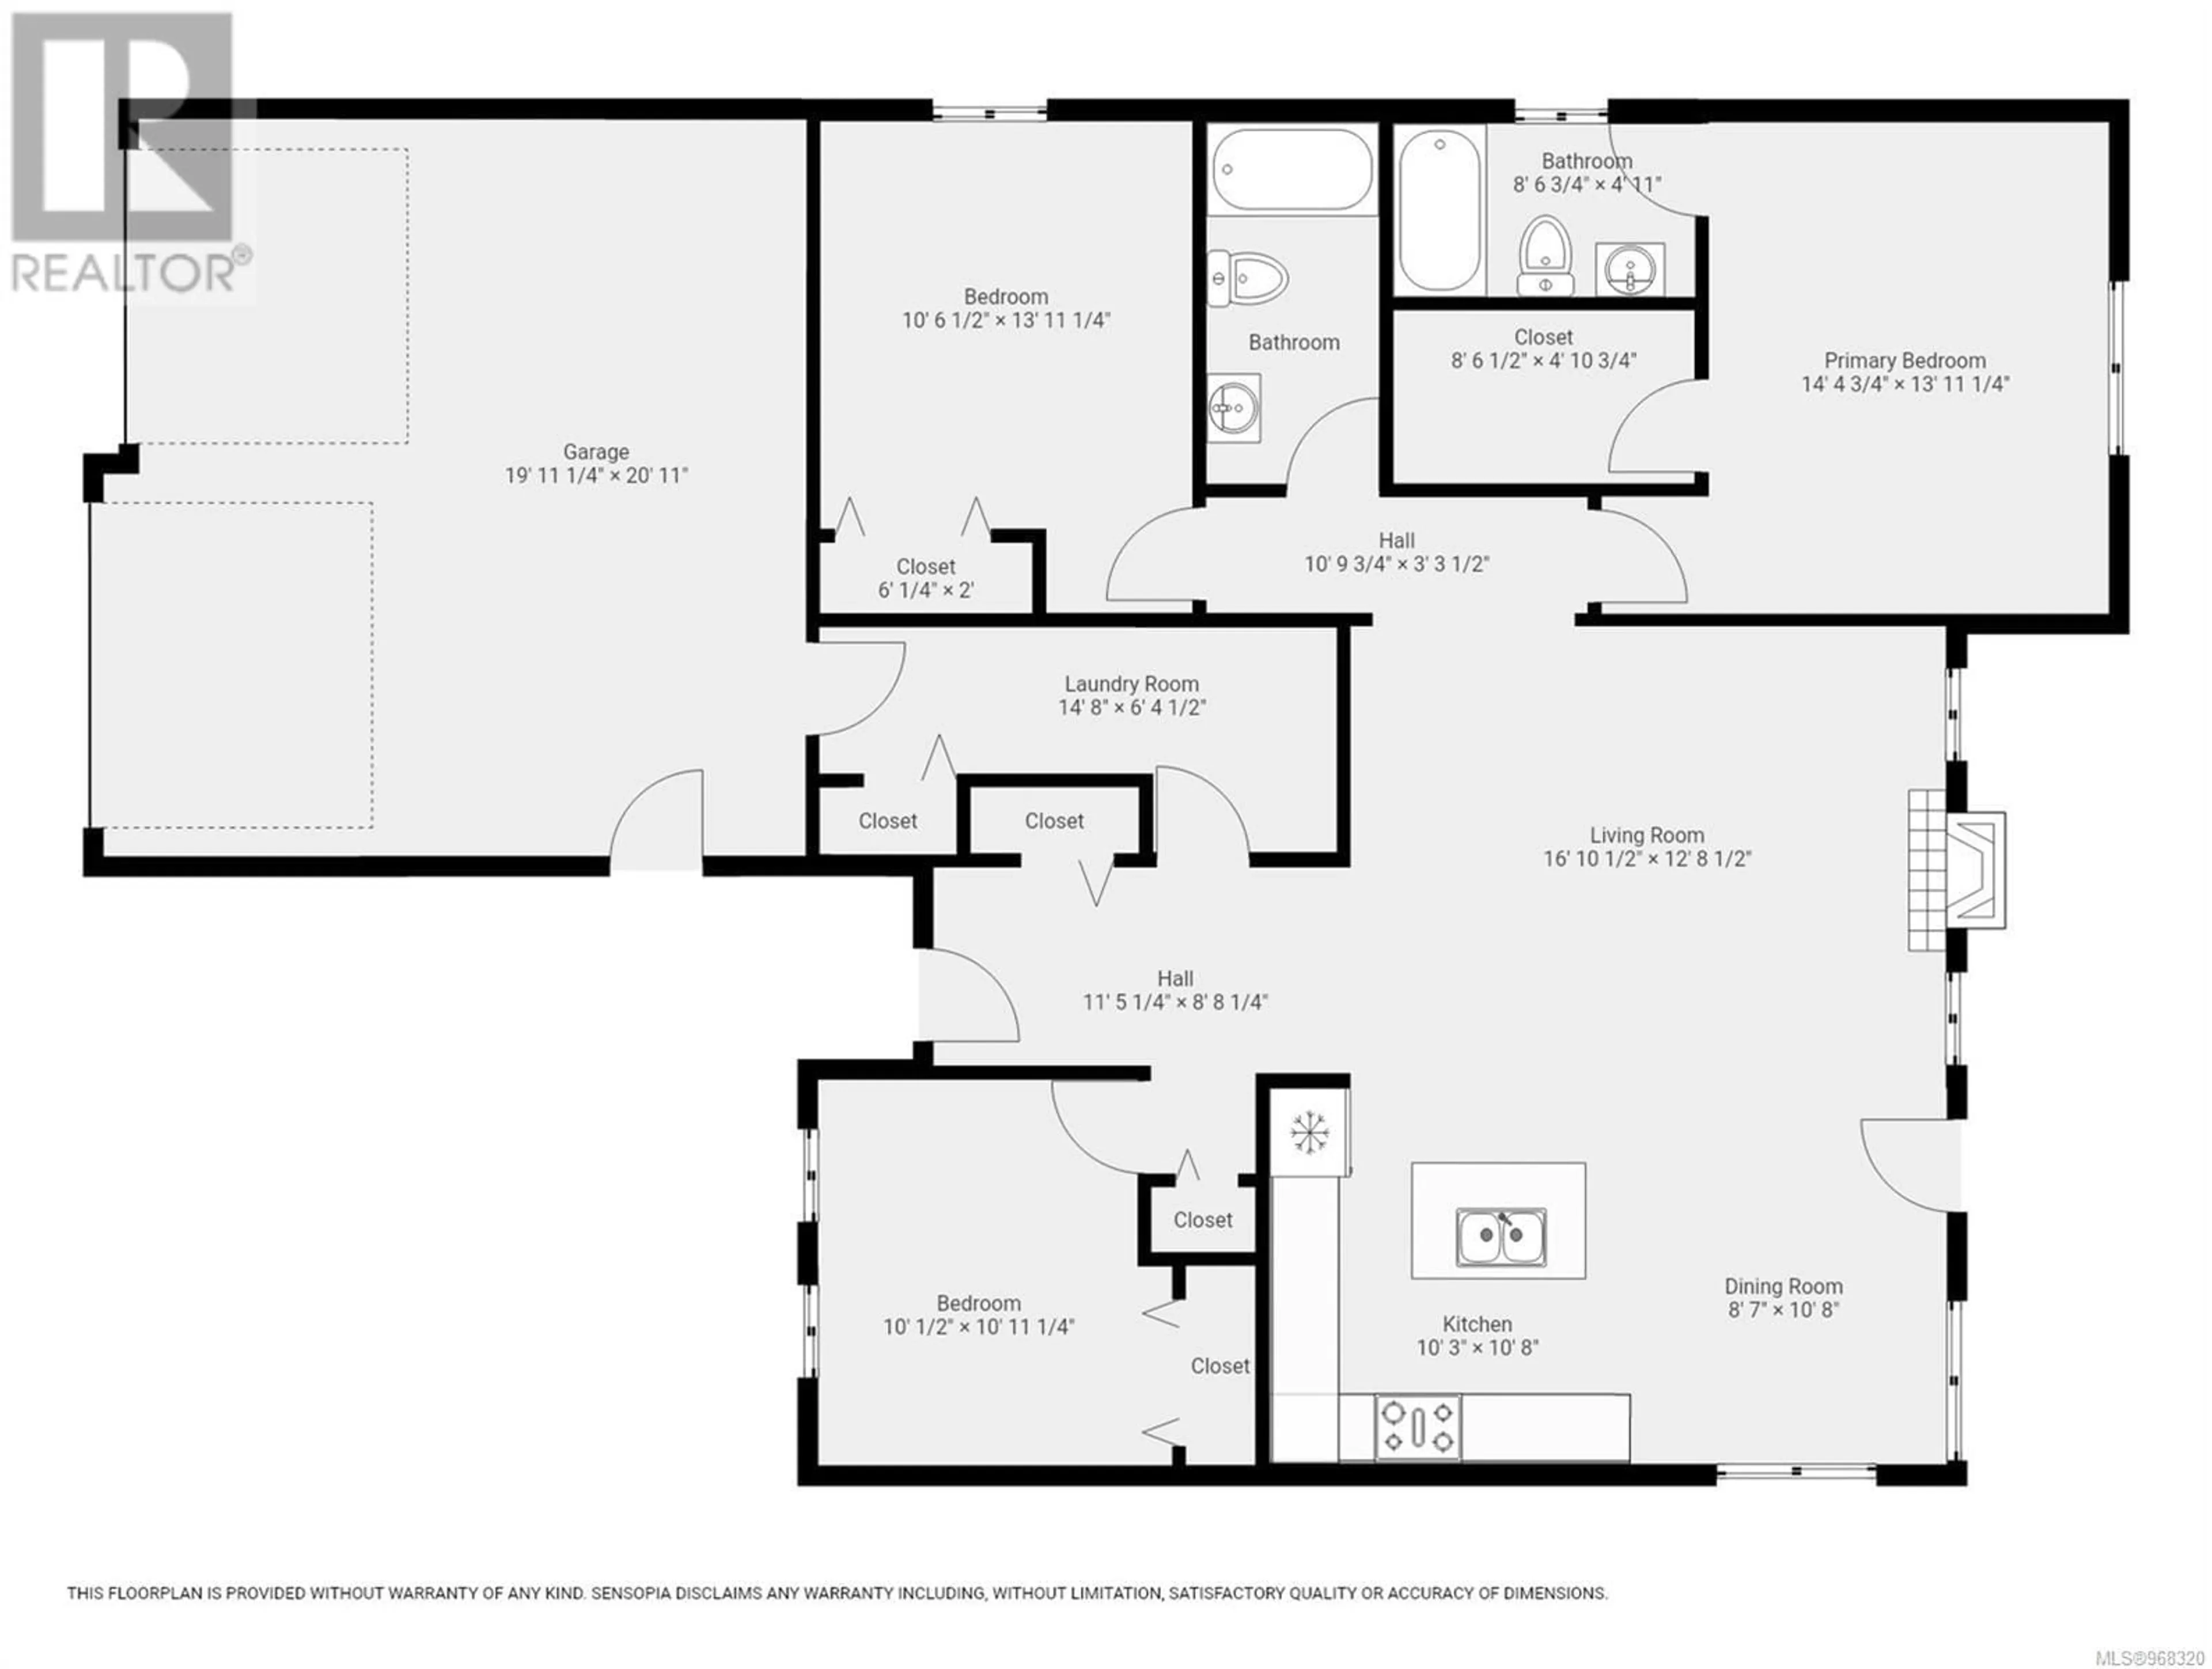 Floor plan for 82 Strathcona Way, Campbell River British Columbia V9H1W4